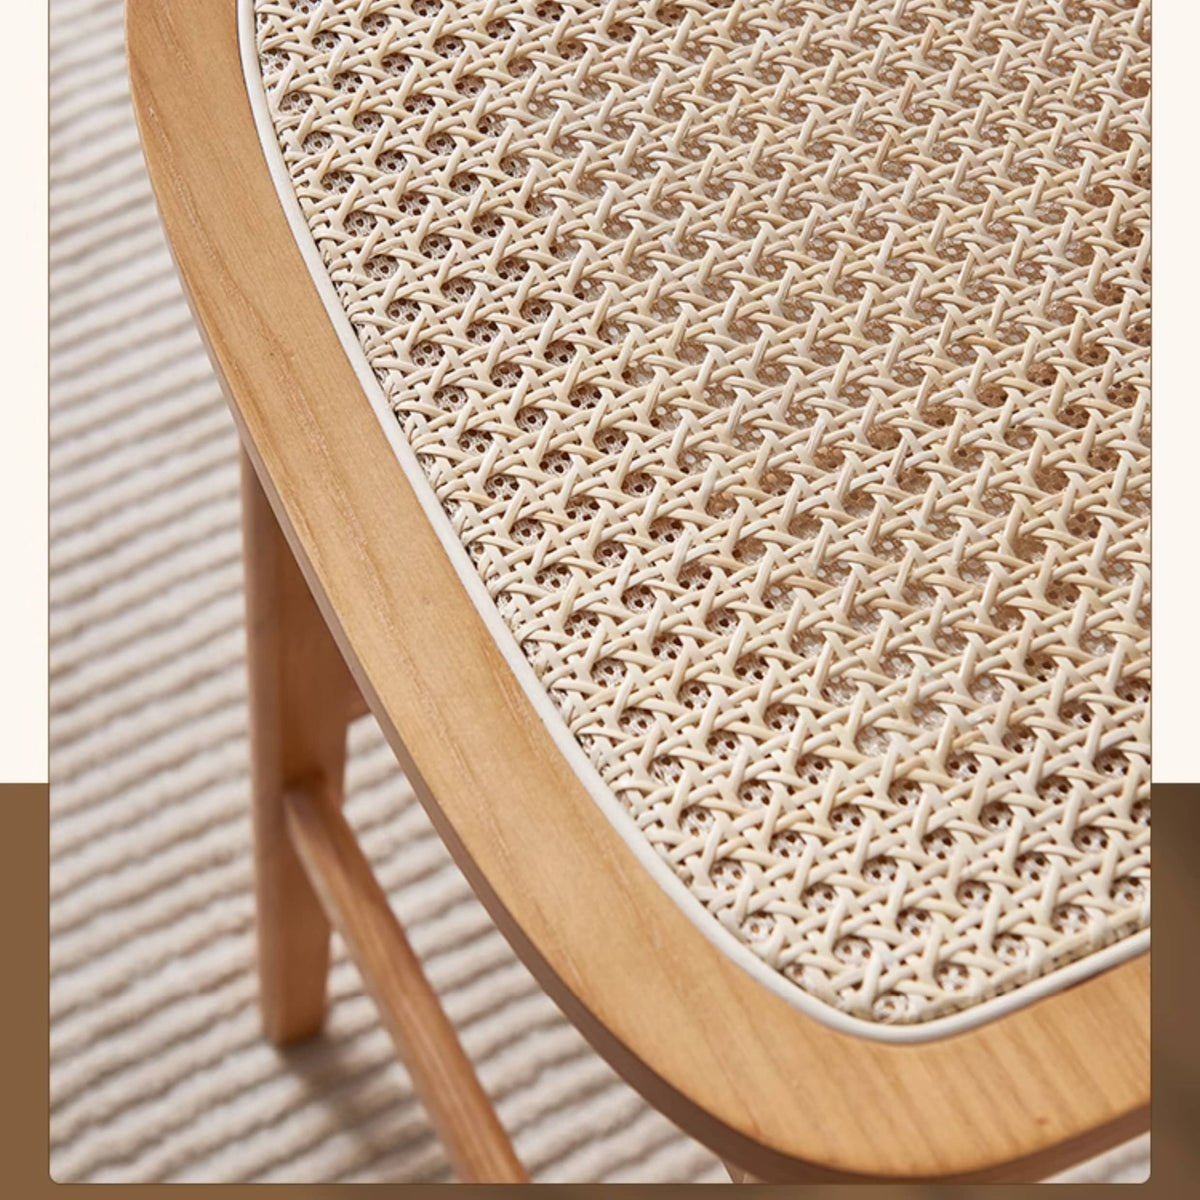 Stylish Light Brown Ash Wood Chair with Natural Rattan Detailing tzm-556